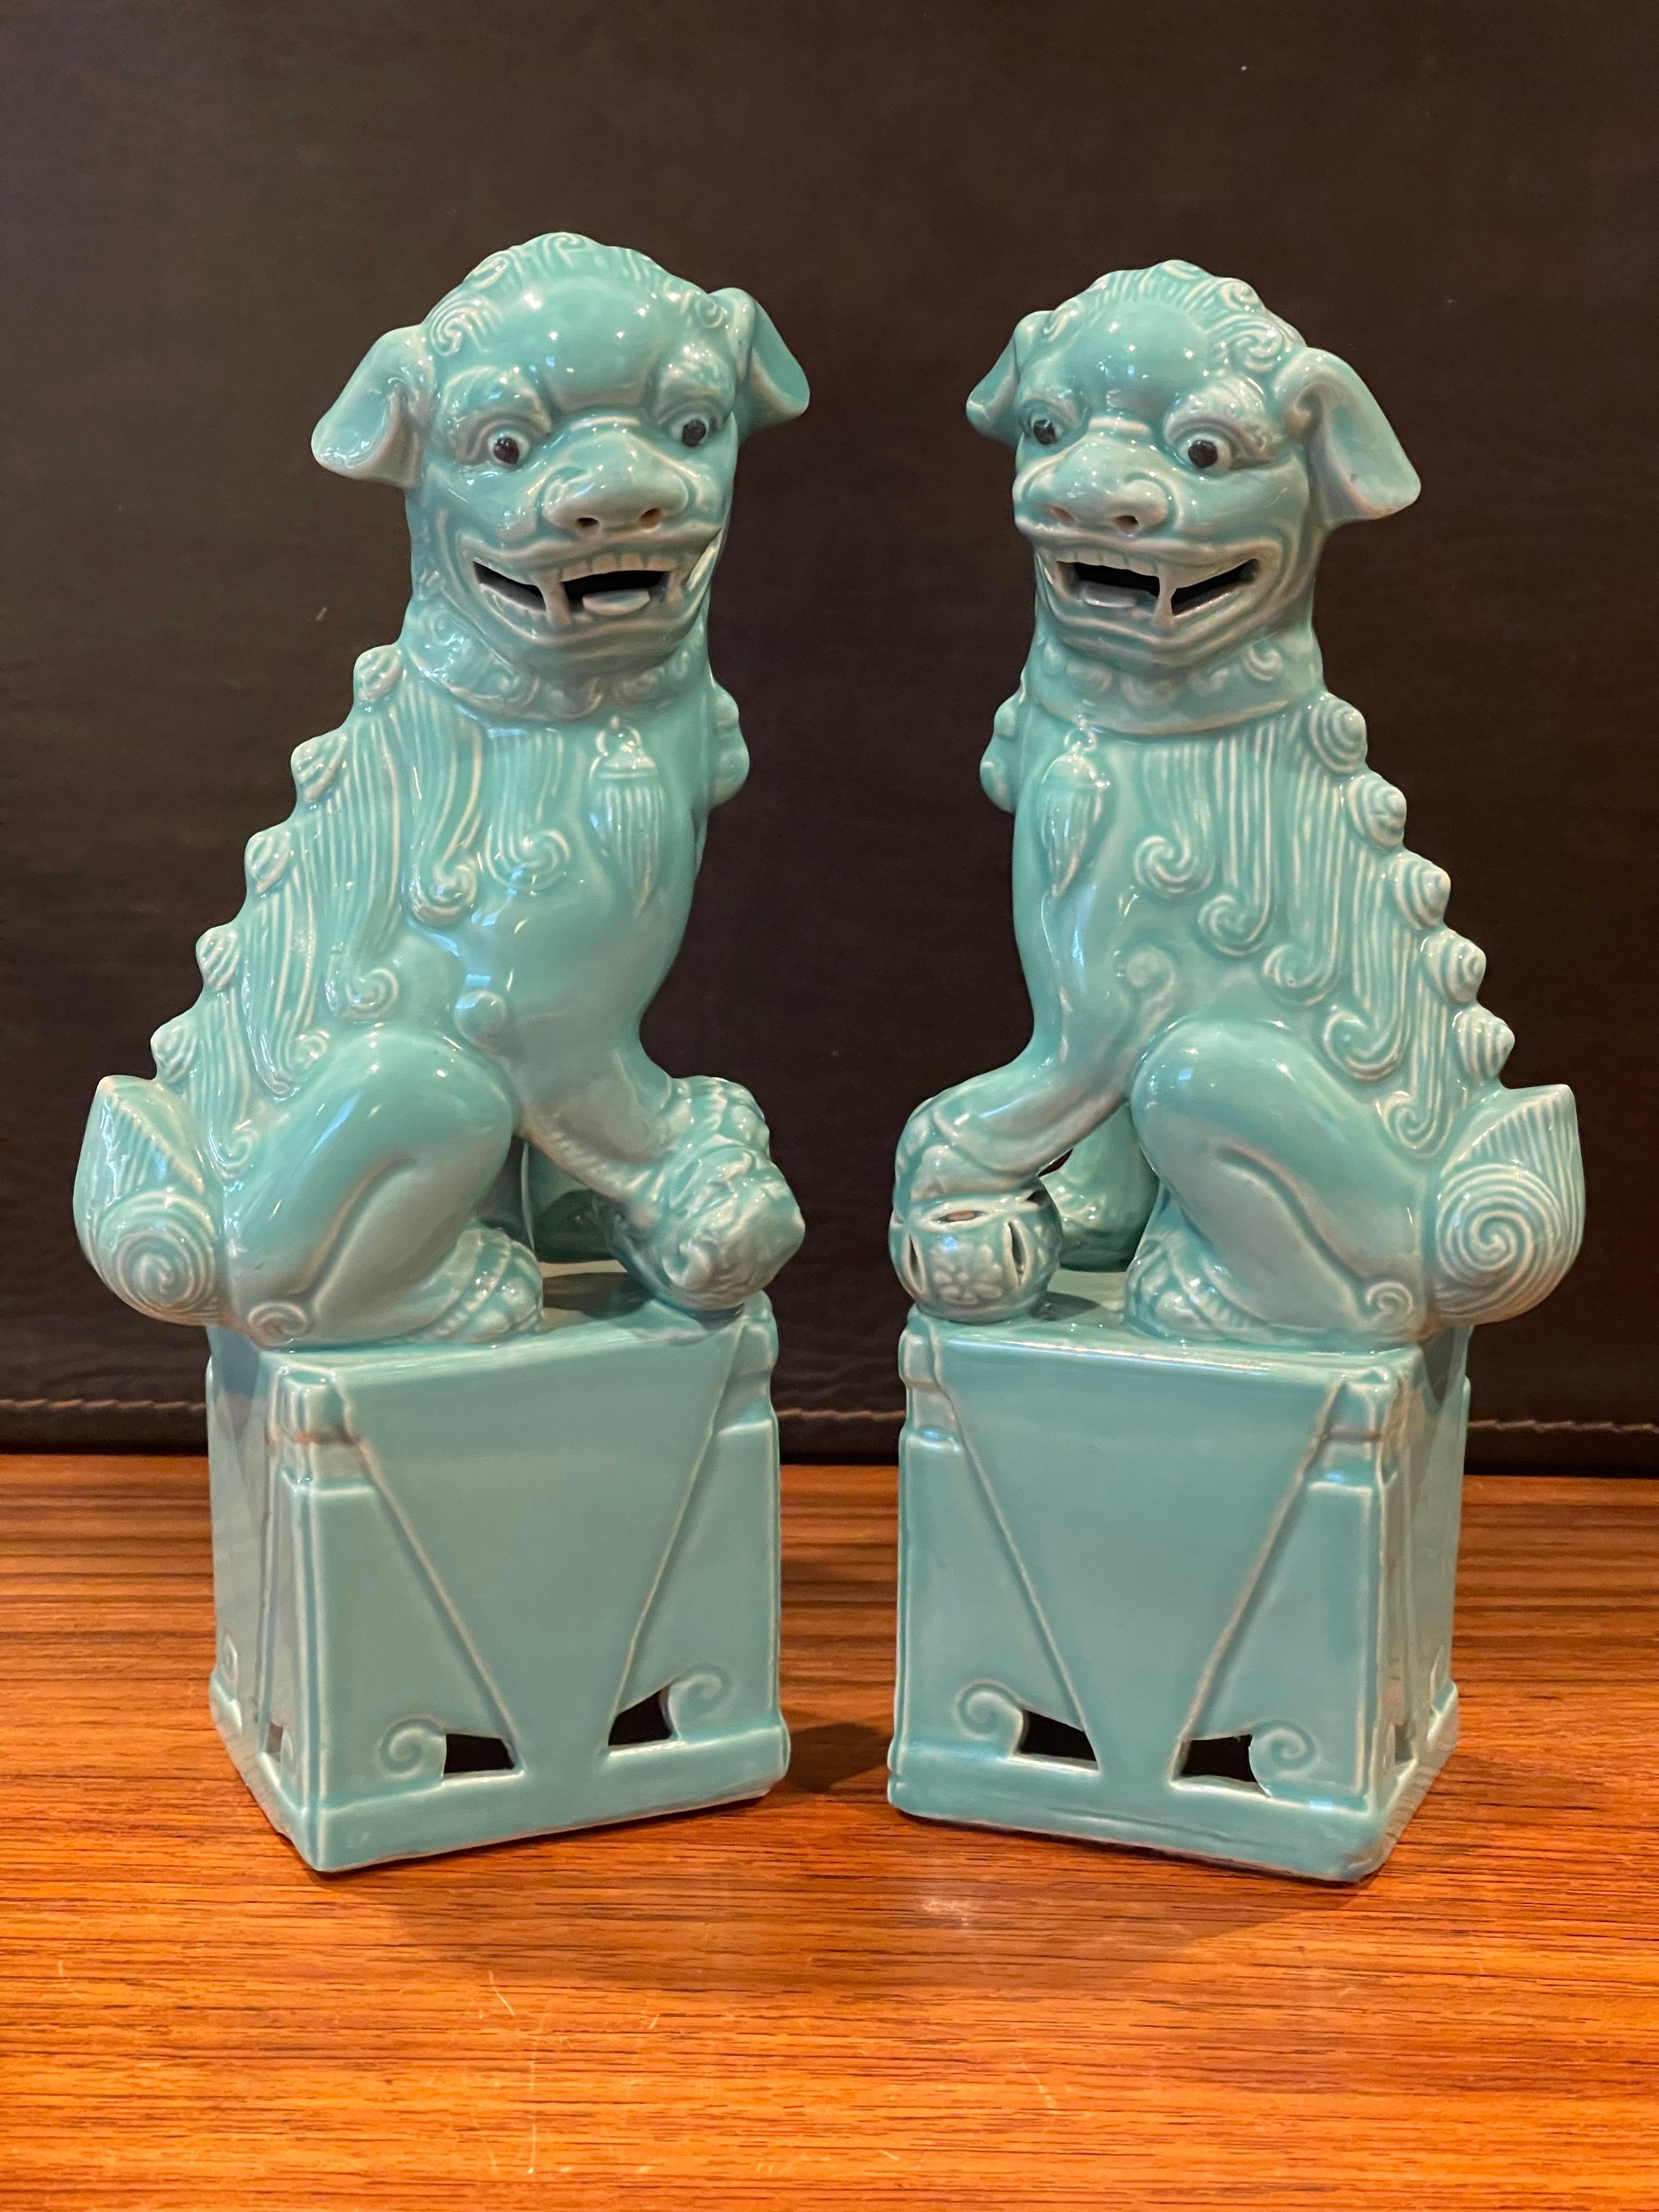 A very nice pair of vintage moss green ceramic foo dogs / bookends, circa 1960s. The pair are in very good condition and have a great patina. They measure 7